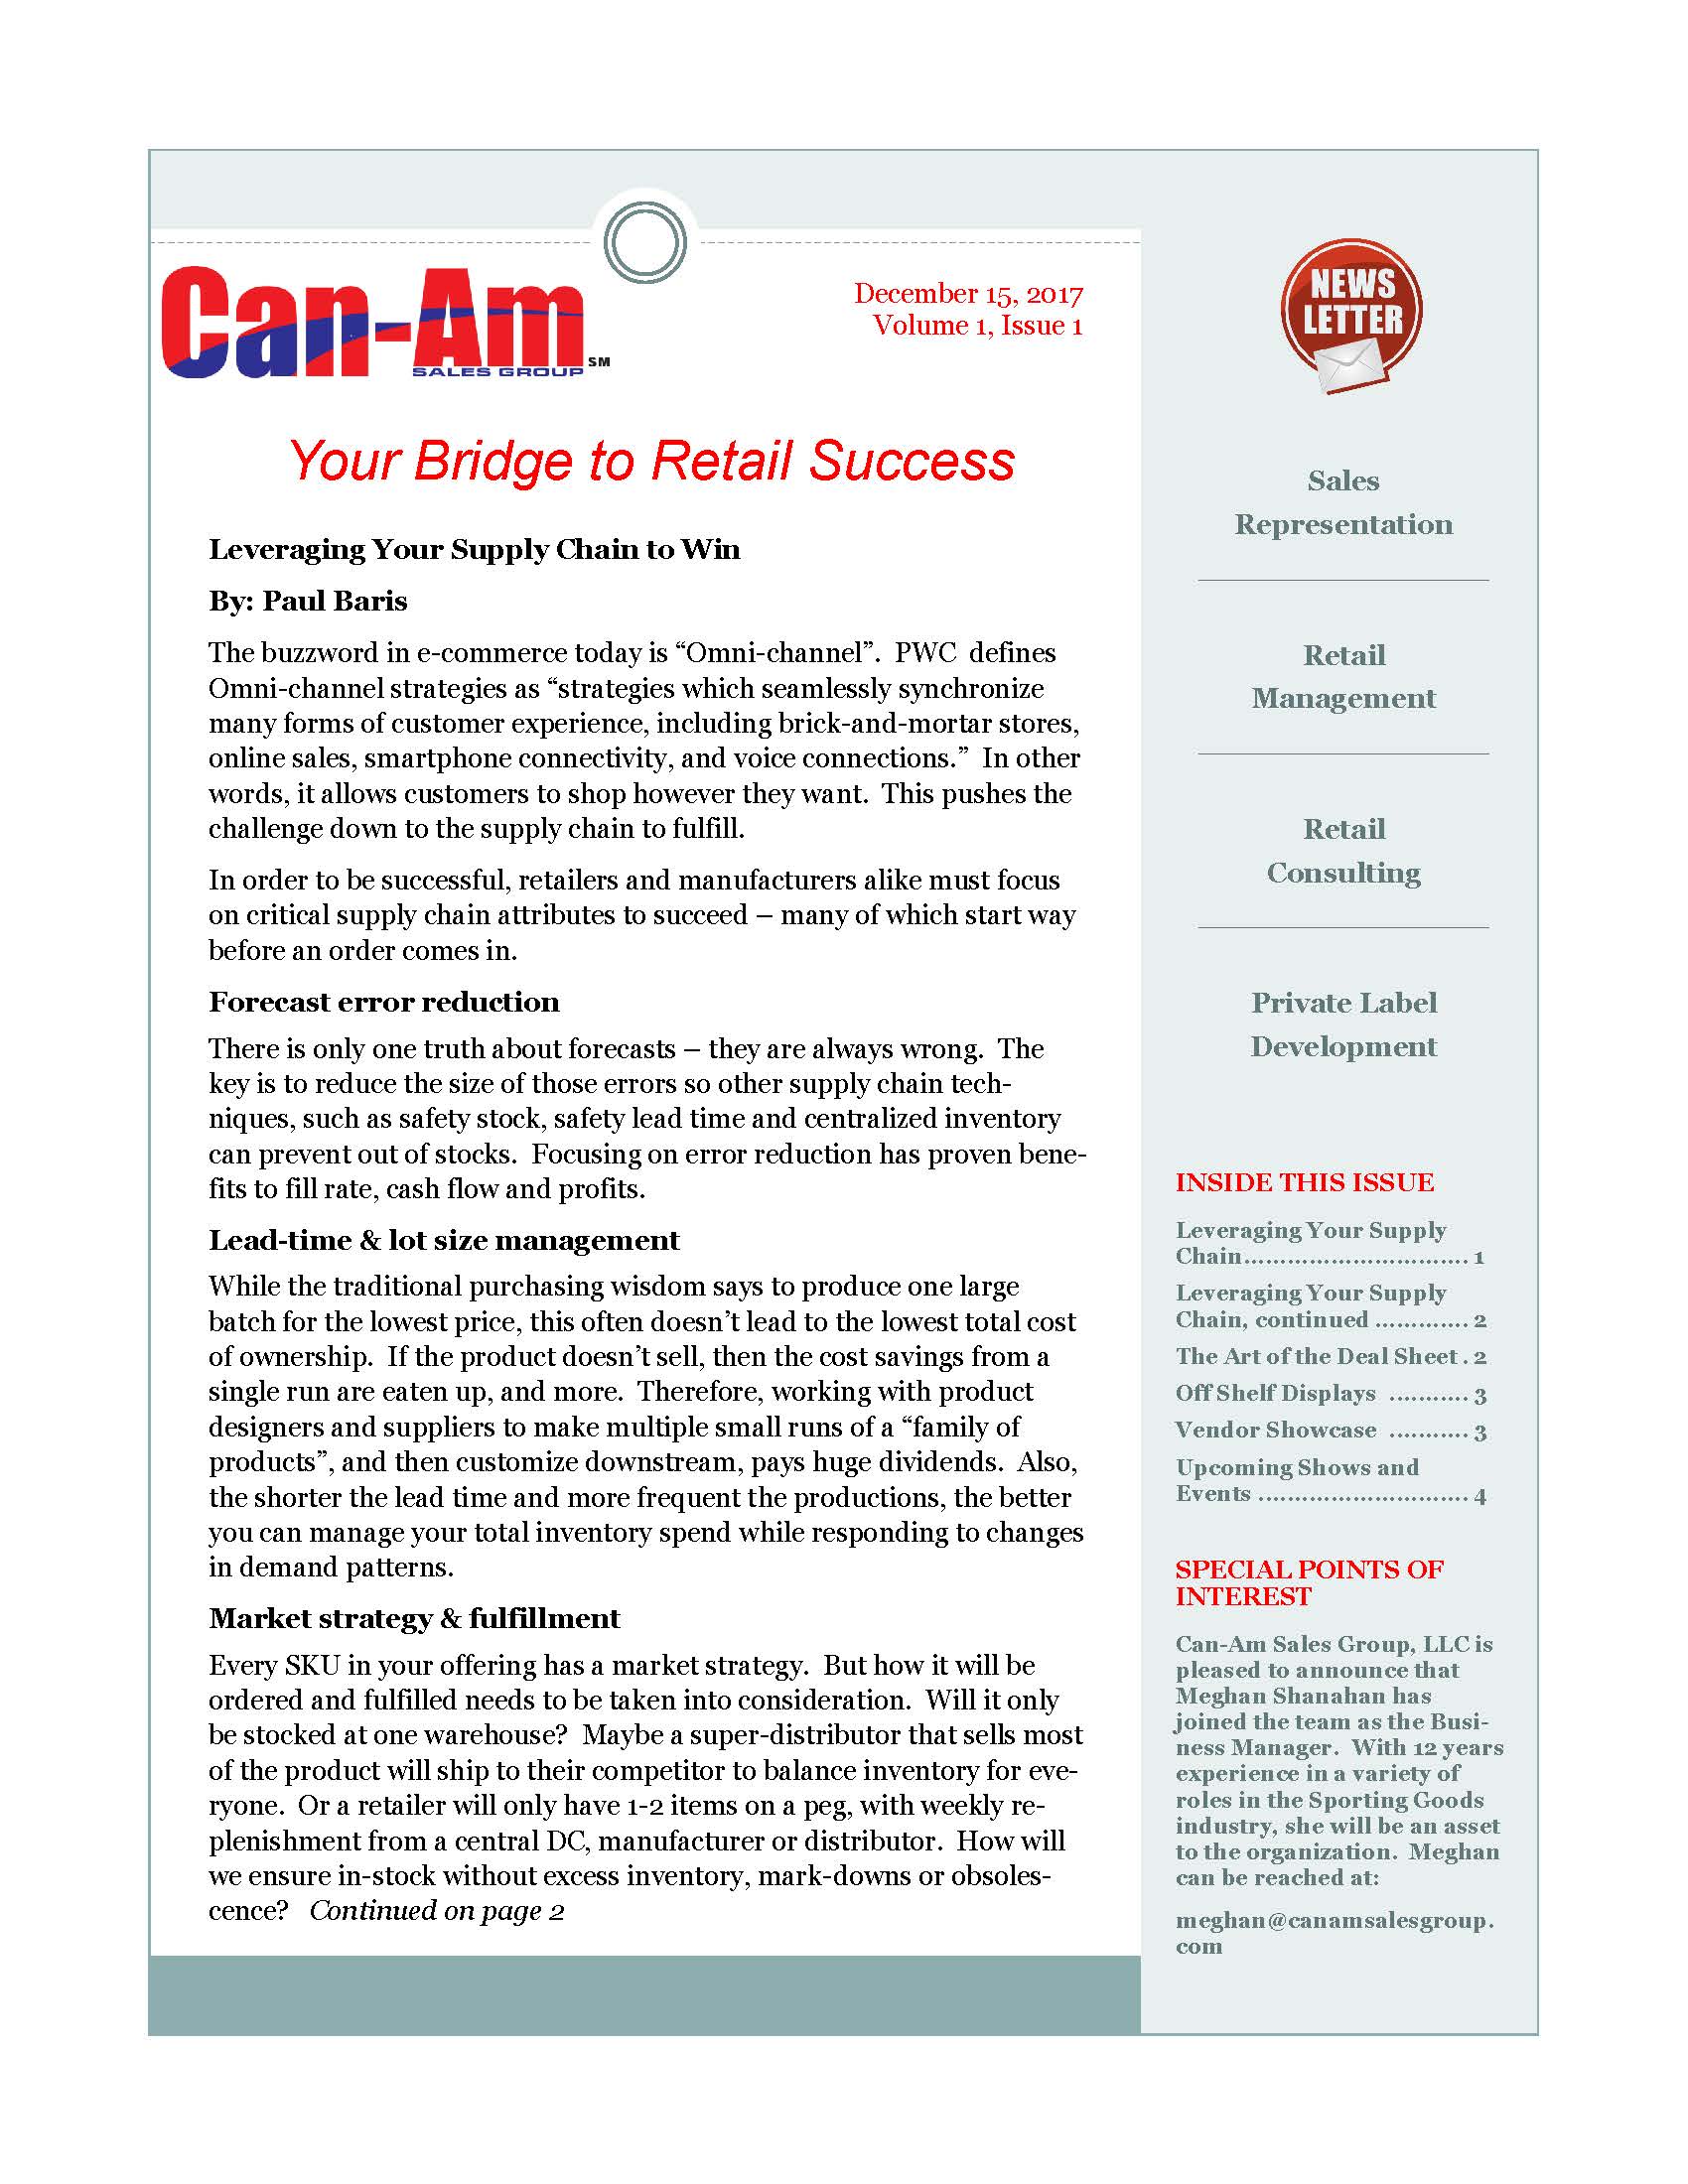 CanAm Newsletter Volume 1, Page 1